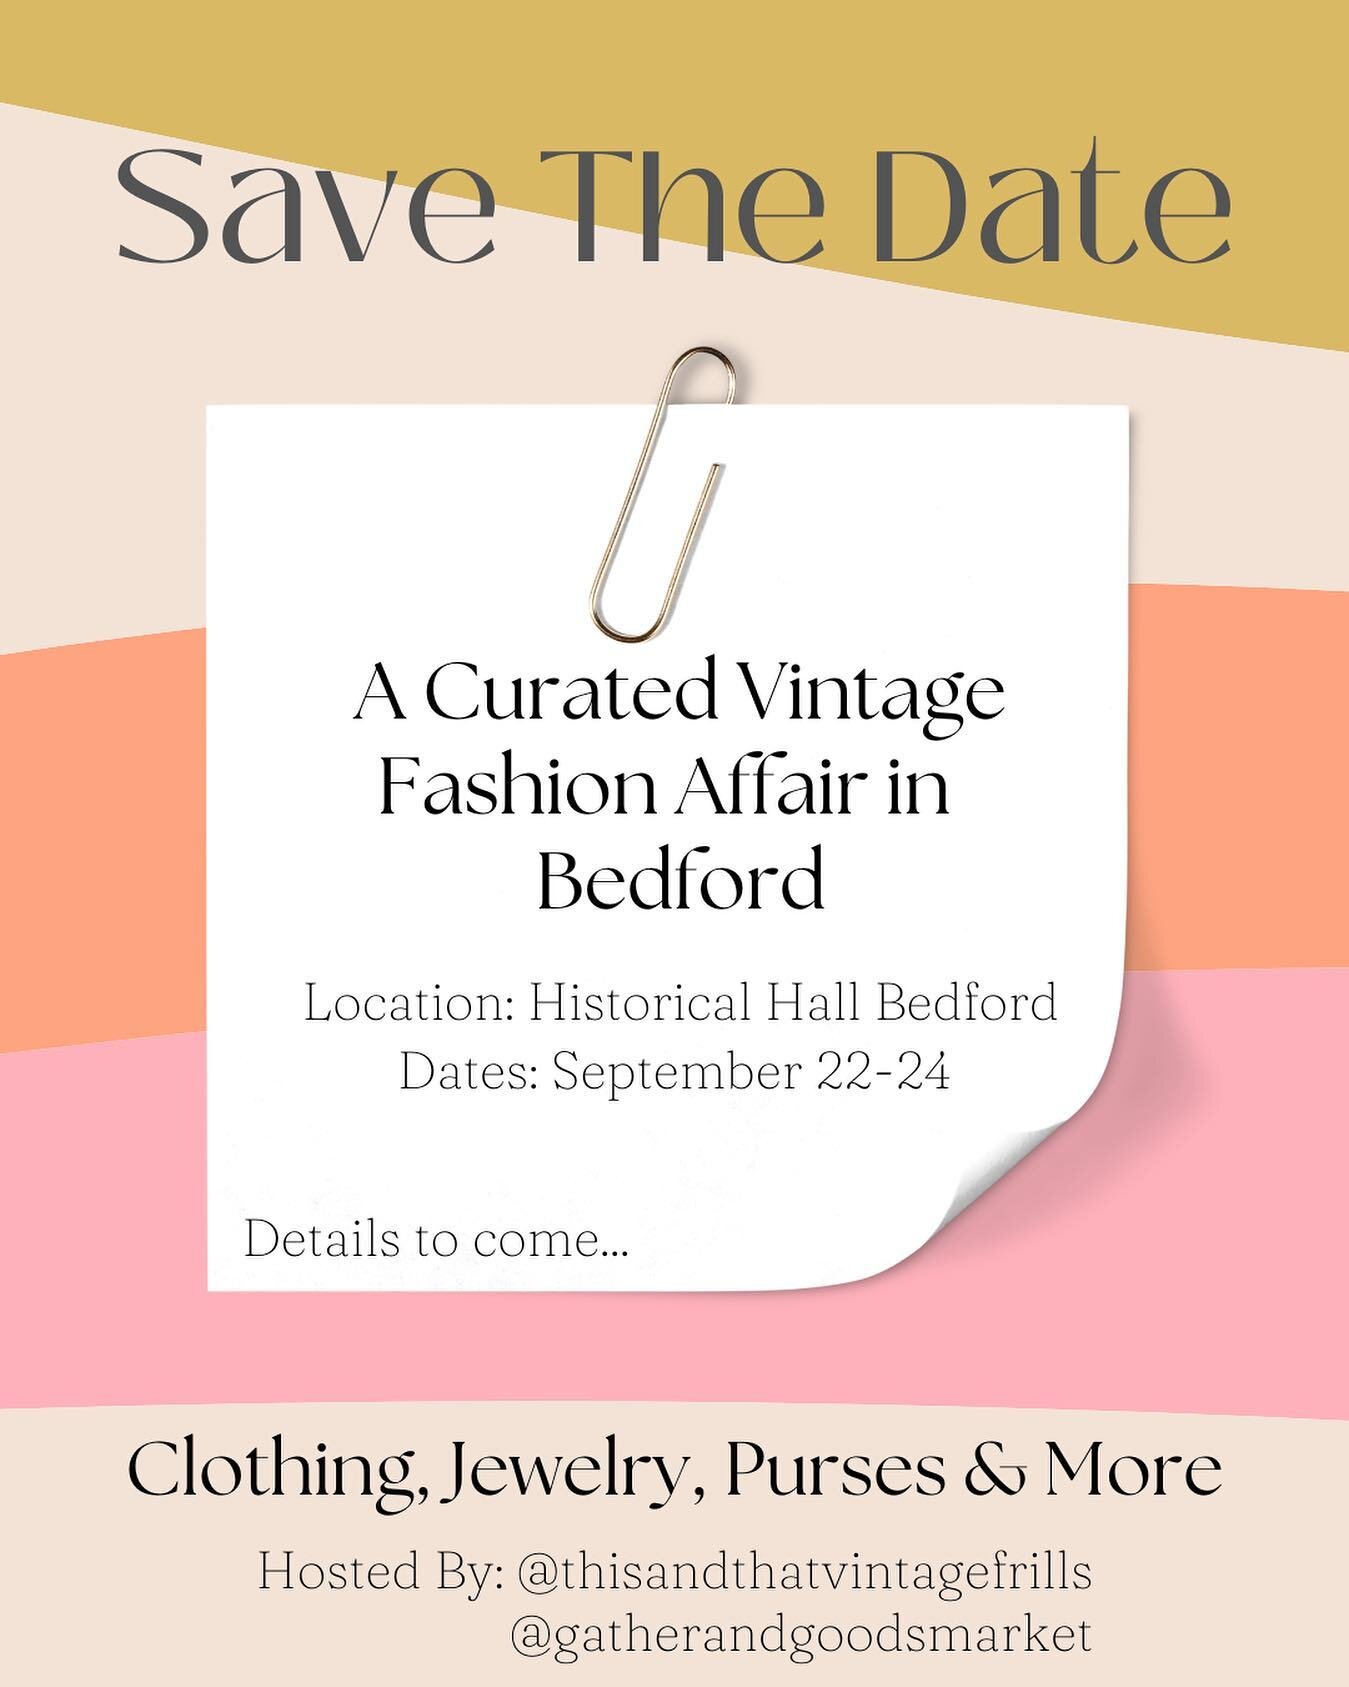 Be sure to mark your calendars for this event! Three days full of Vintage Fashions, Food, libations, prizes, portrait photography and so much more! We are still looking for high end Vintage Fashion sellers&hellip;if you or someone you know might be i